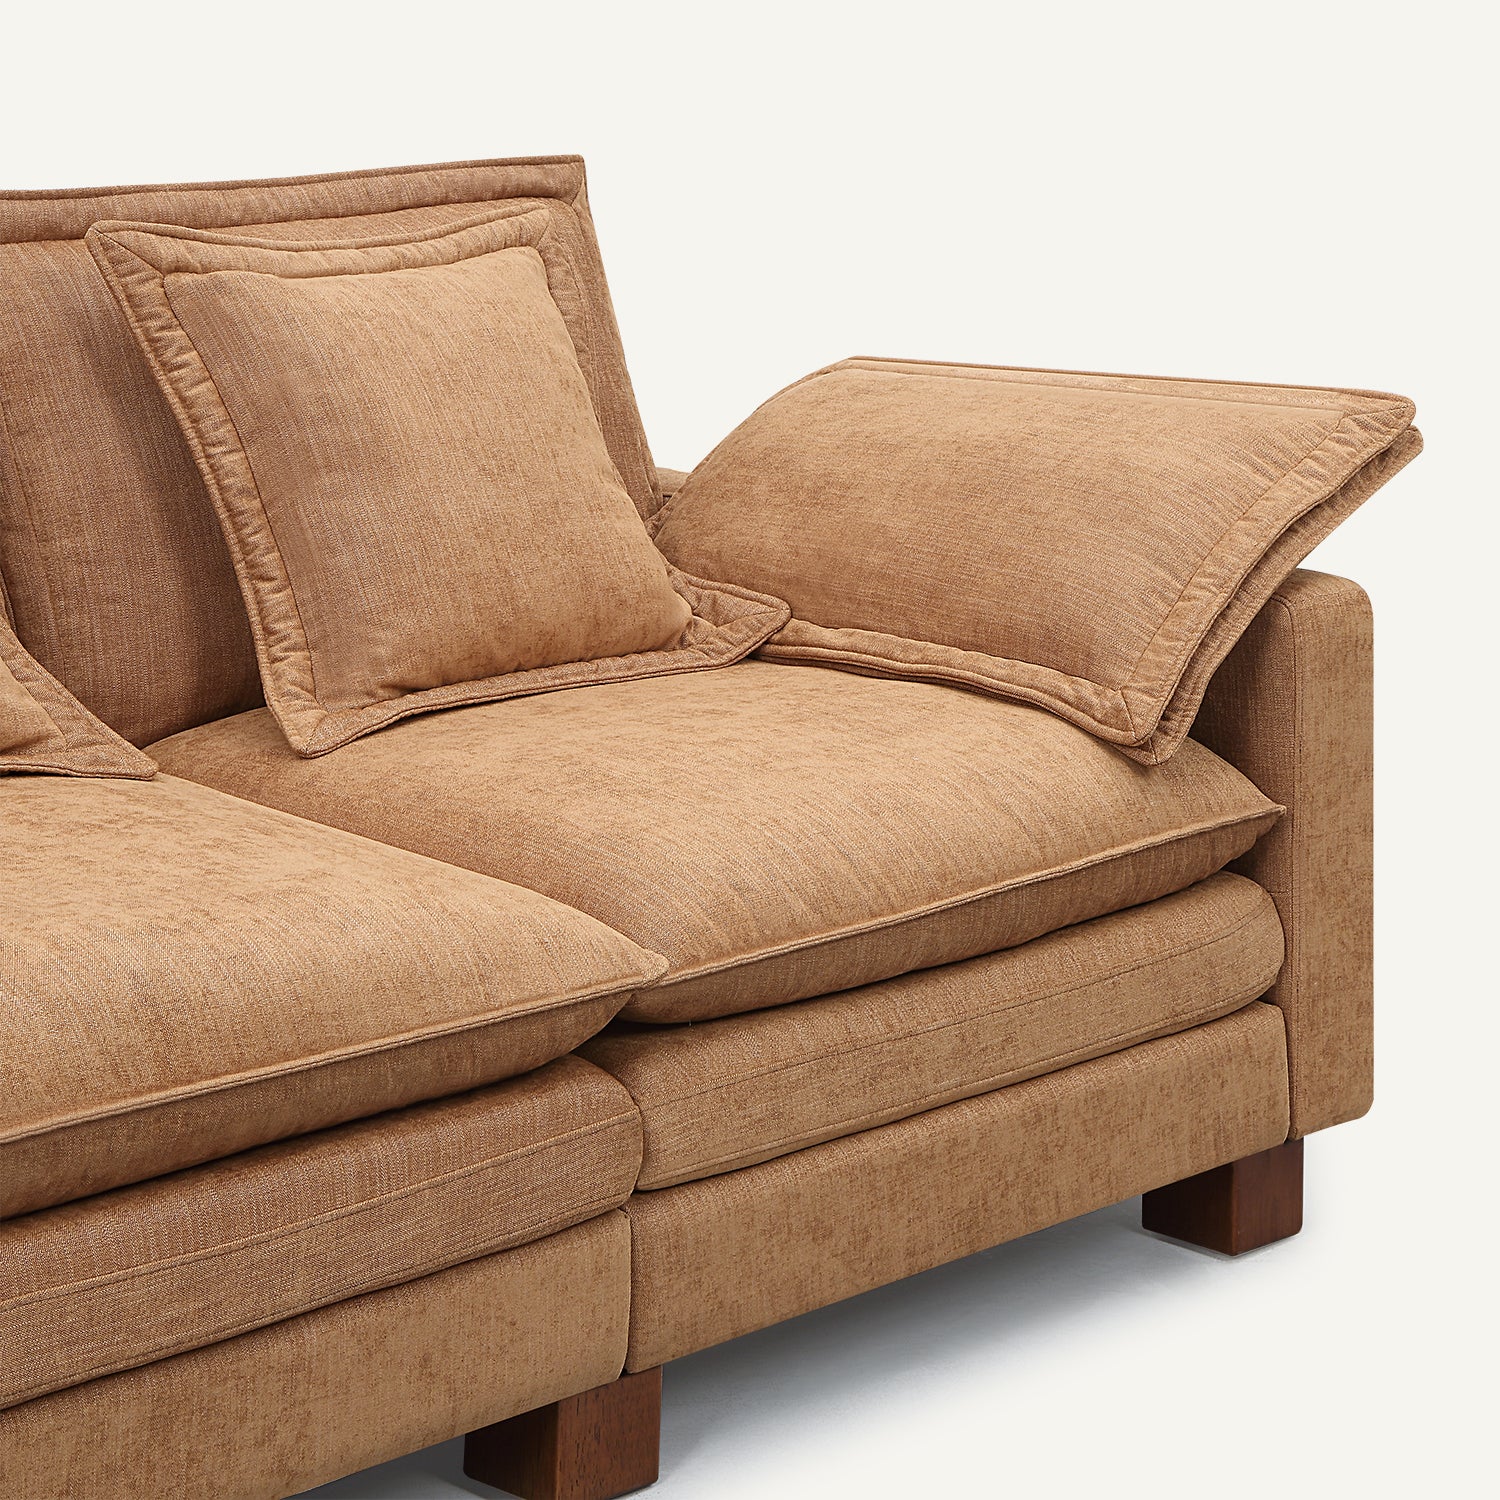 Stacked Tan Linen Armchair with Ottoman